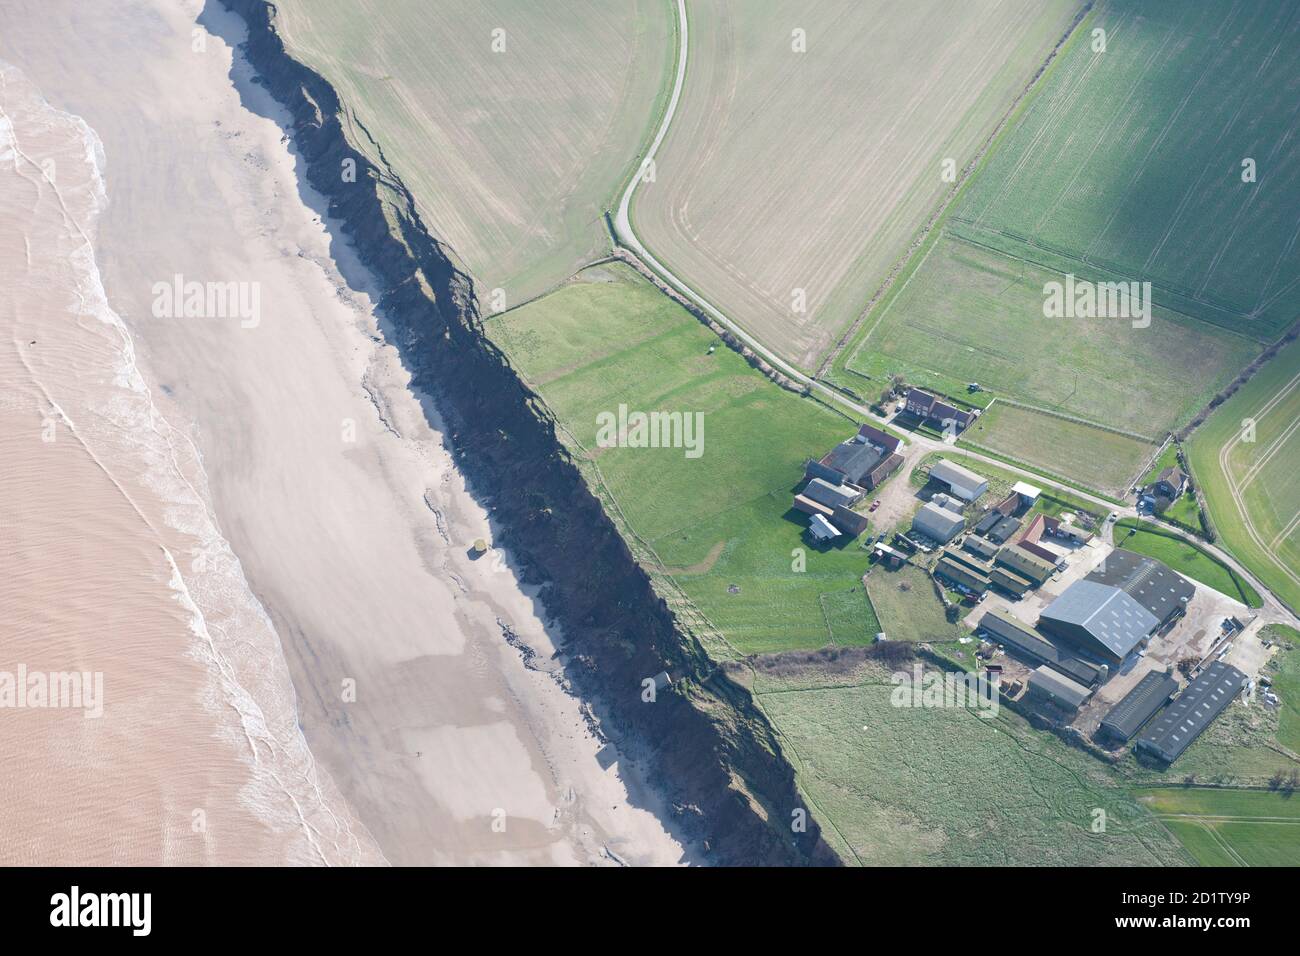 Ridge and furrow earthworks at low farm and evidence of coastal erosion with collapse of pillbox on to beach and second World War engine room (generator house) slipping down the cliff, Aldbrough Sands, East Riding of Yorkshire, 2014, UK. Aerial view. Stock Photo